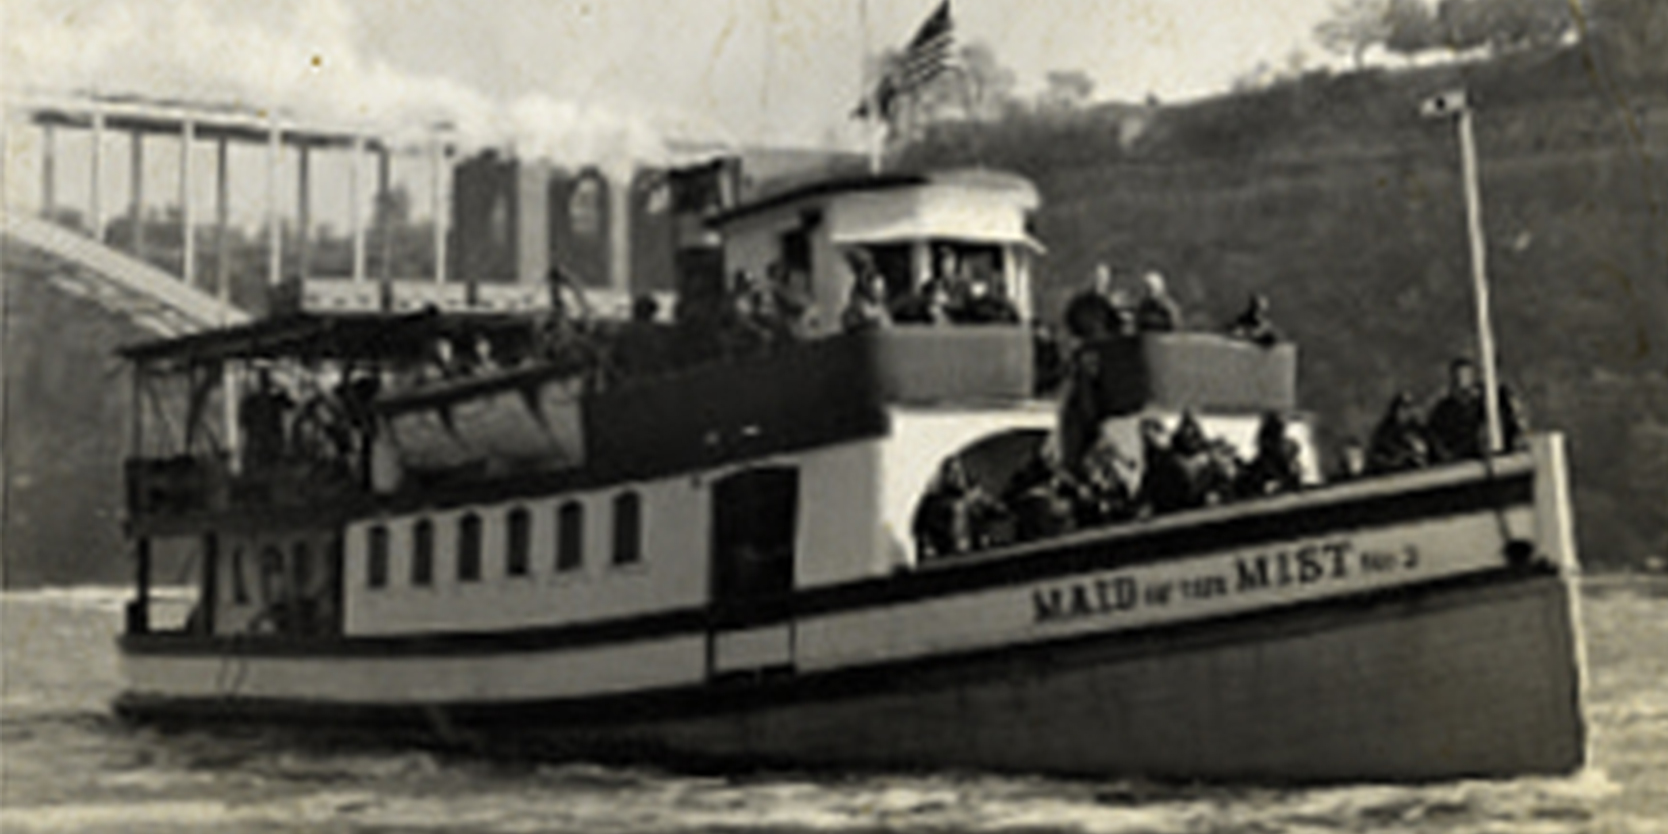 Vintage Maid of the Mist barco